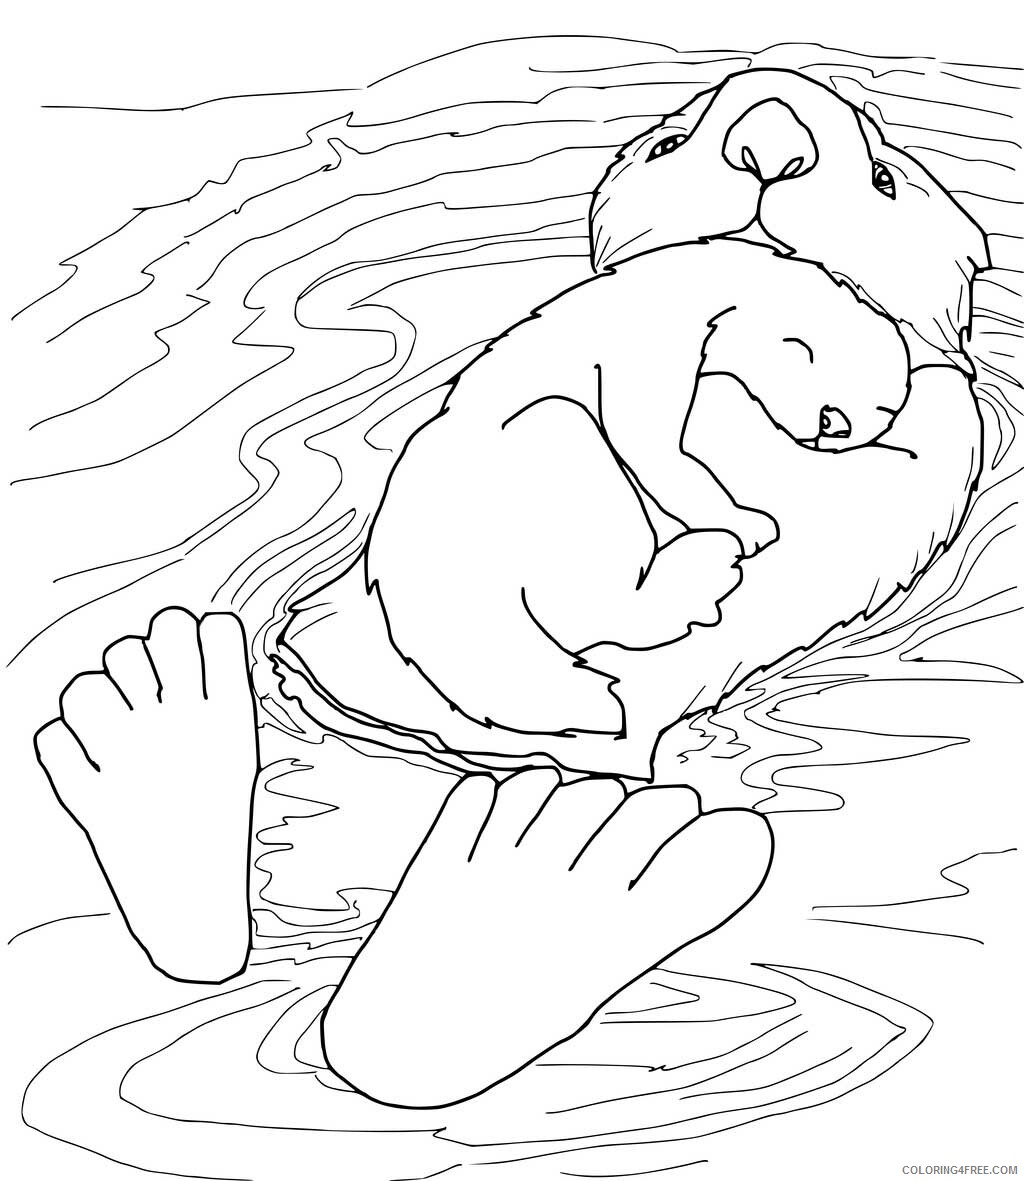 Otter Coloring Pages Animal Printable Sheets Sweet Otters 2021 3596 Coloring4free